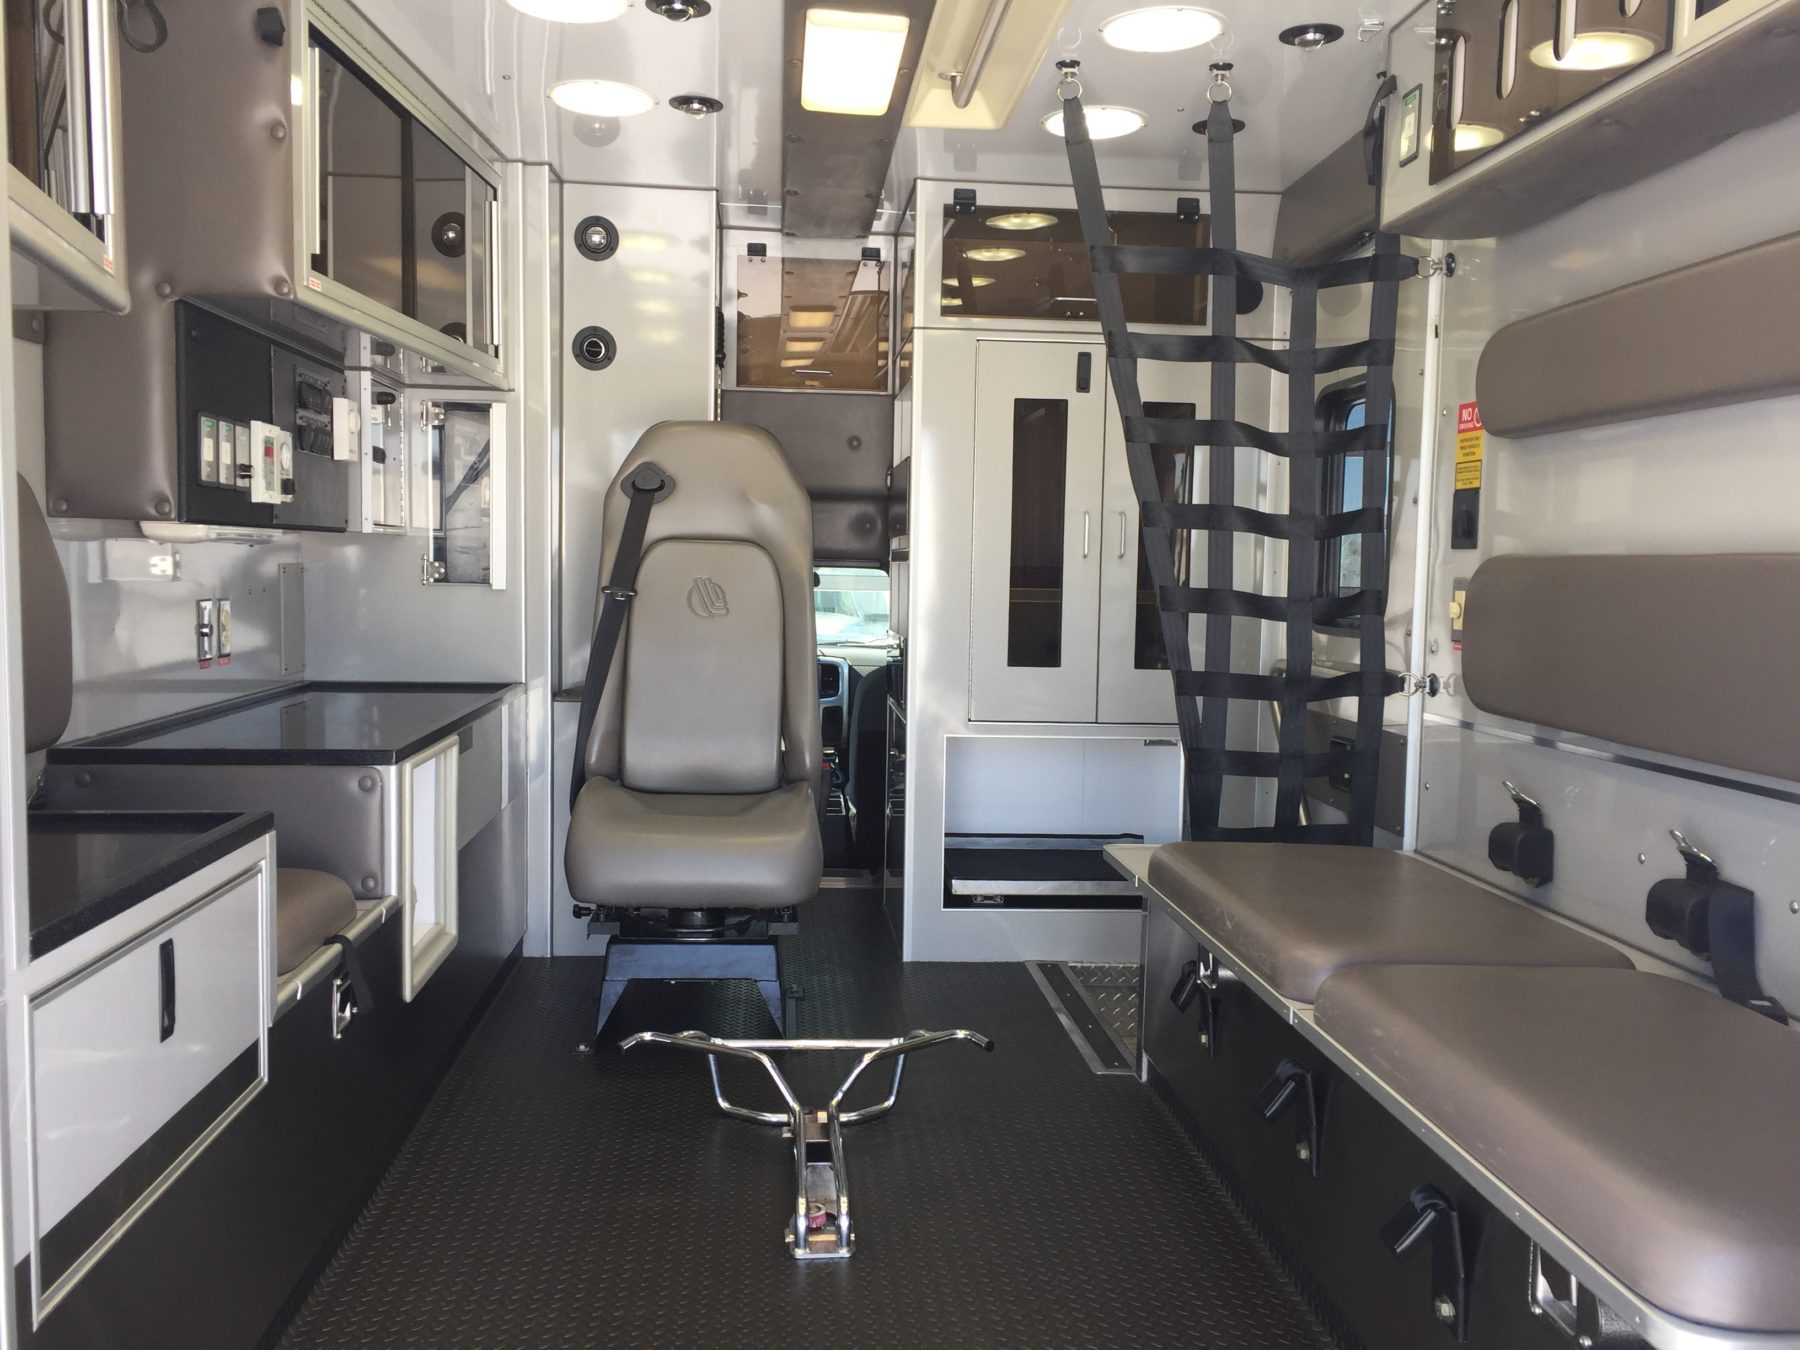 2015 Dodge 4500 4x4 Heavy Duty Ambulance For Sale – Picture 3